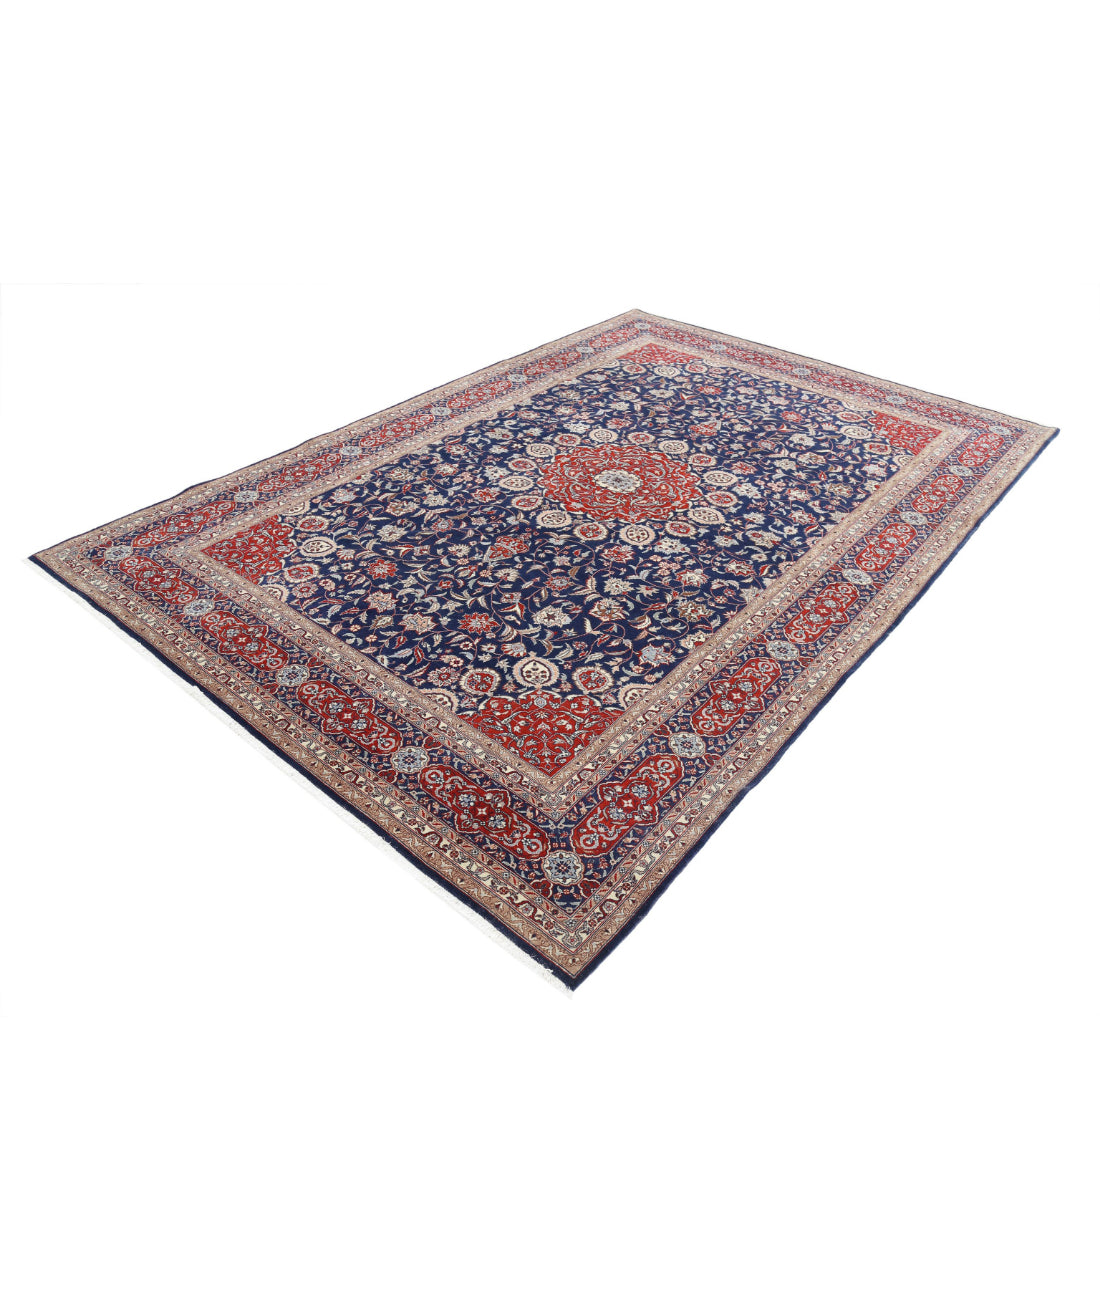 Hand Knotted Heritage Fine Persian Style Wool Rug - 6'8'' x 9'10'' 6'8'' x 9'10'' (200 X 295) / Blue / Red